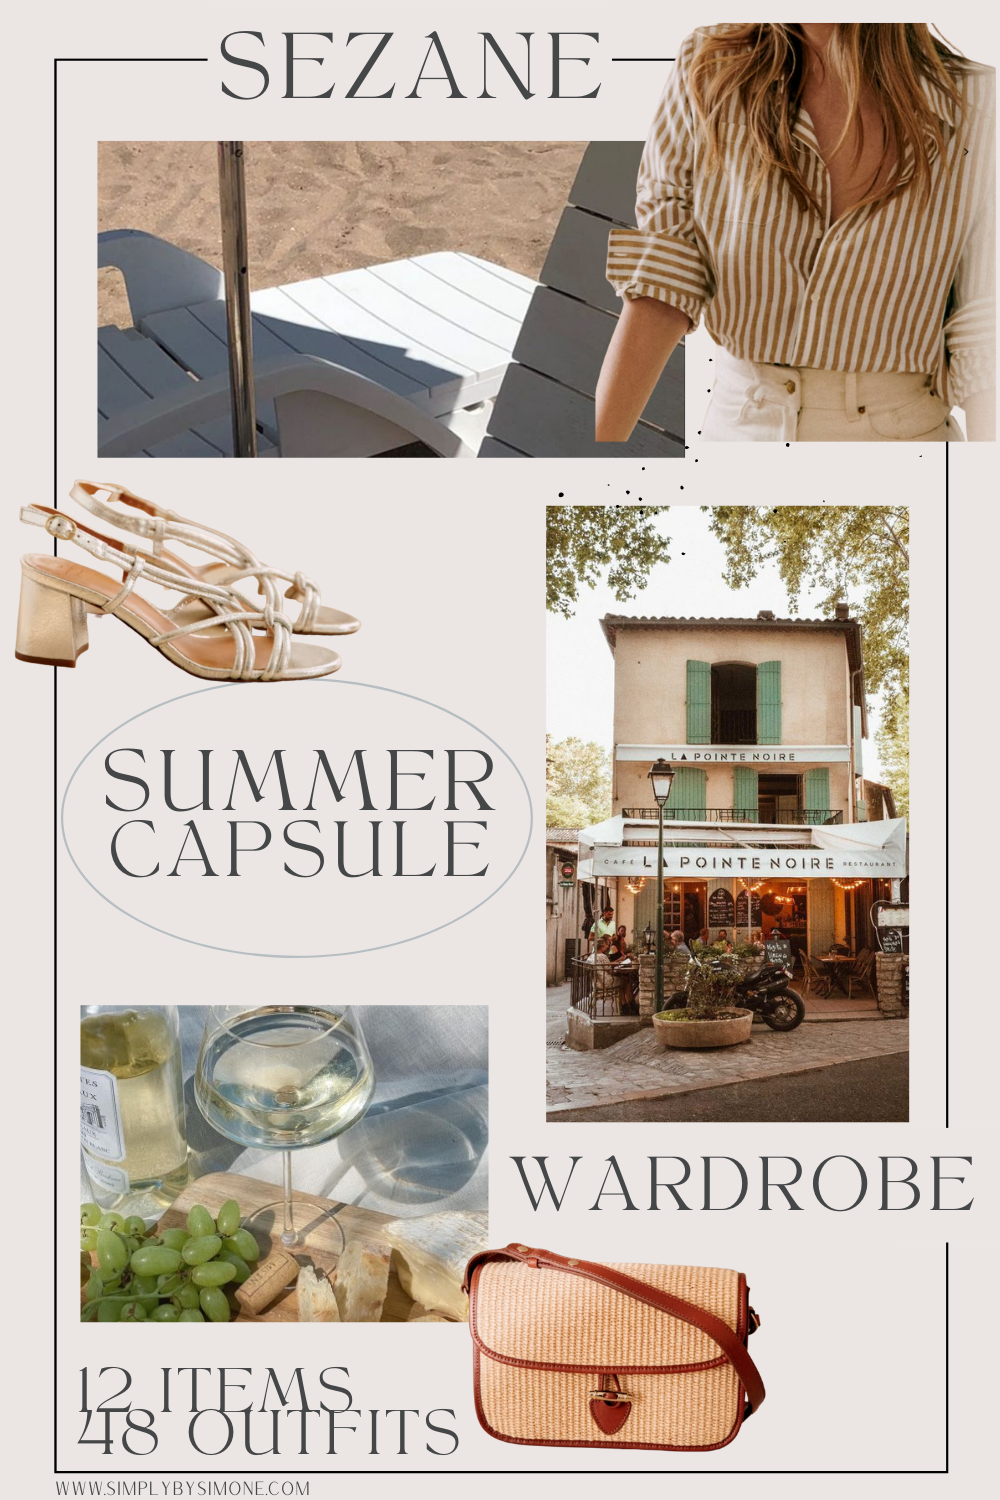 Affordable Sezane Summer Capsule Wardrobe | 12 Pieces, 48 Outfits | How to Build a Capsule Wardrobe | Sezane Summer Clothes | Outfit Inspiration | 48 Summer Weather Outfit Ideas | Summer Vacation Packing Guide | Sezane Summer Capsule Wardrobe - What To Wear This Summer 2023, Parisian Outfit Ideas | Cover Image | Simply by Simone